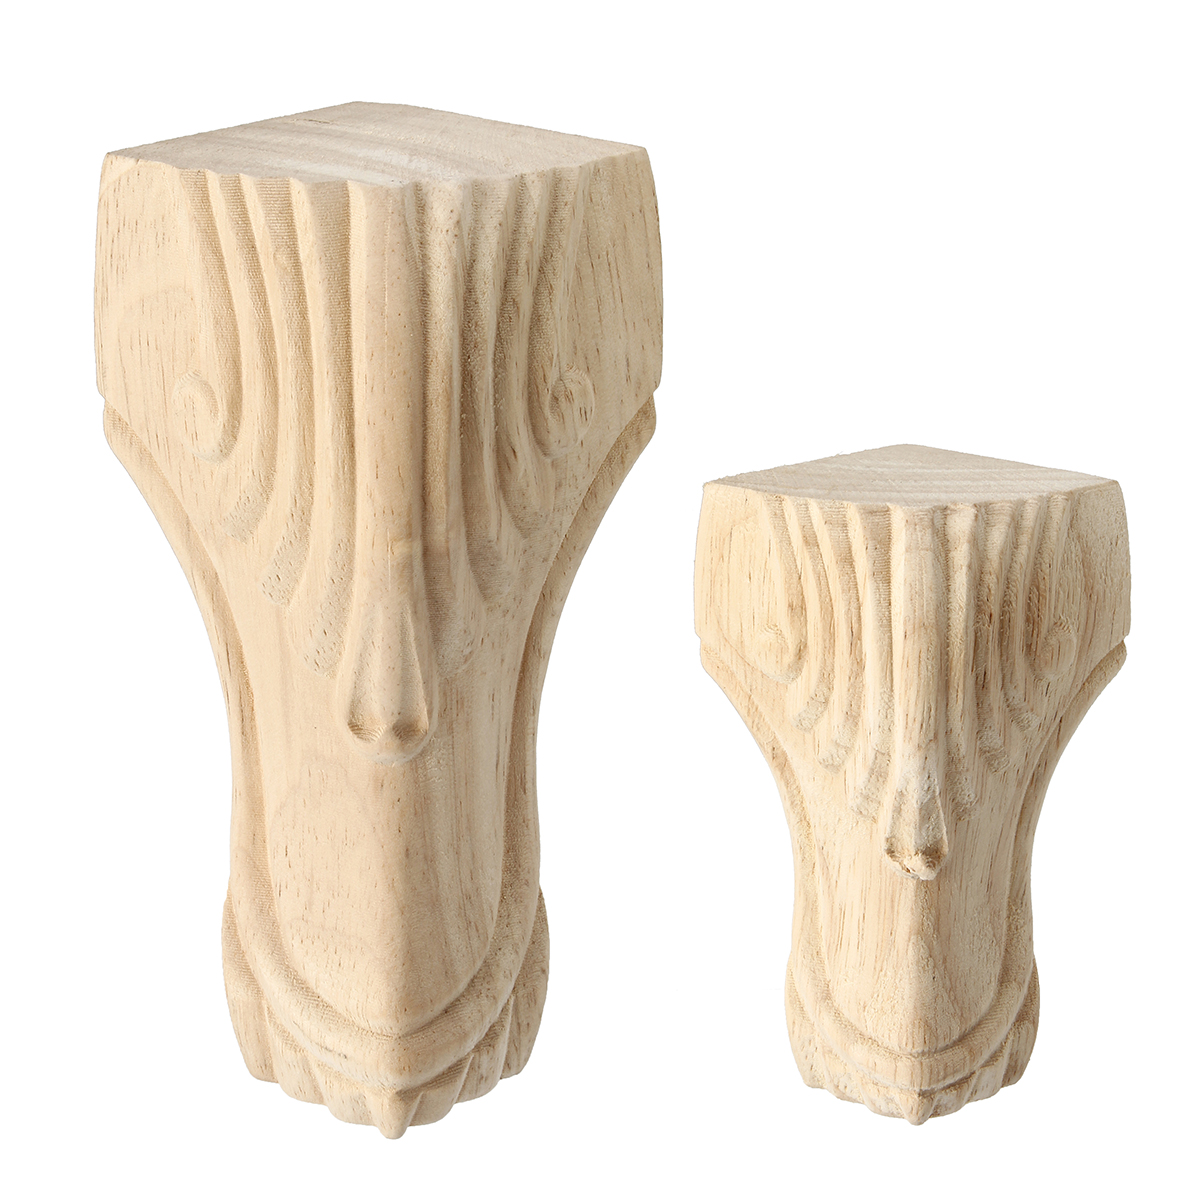 4Pcs-1015cm-European-Solid-Wood-Carving-Furniture-Foot-Legs-Unpainted-Couch-Cabinet-Sofa-Seat-Feets-1321345-1